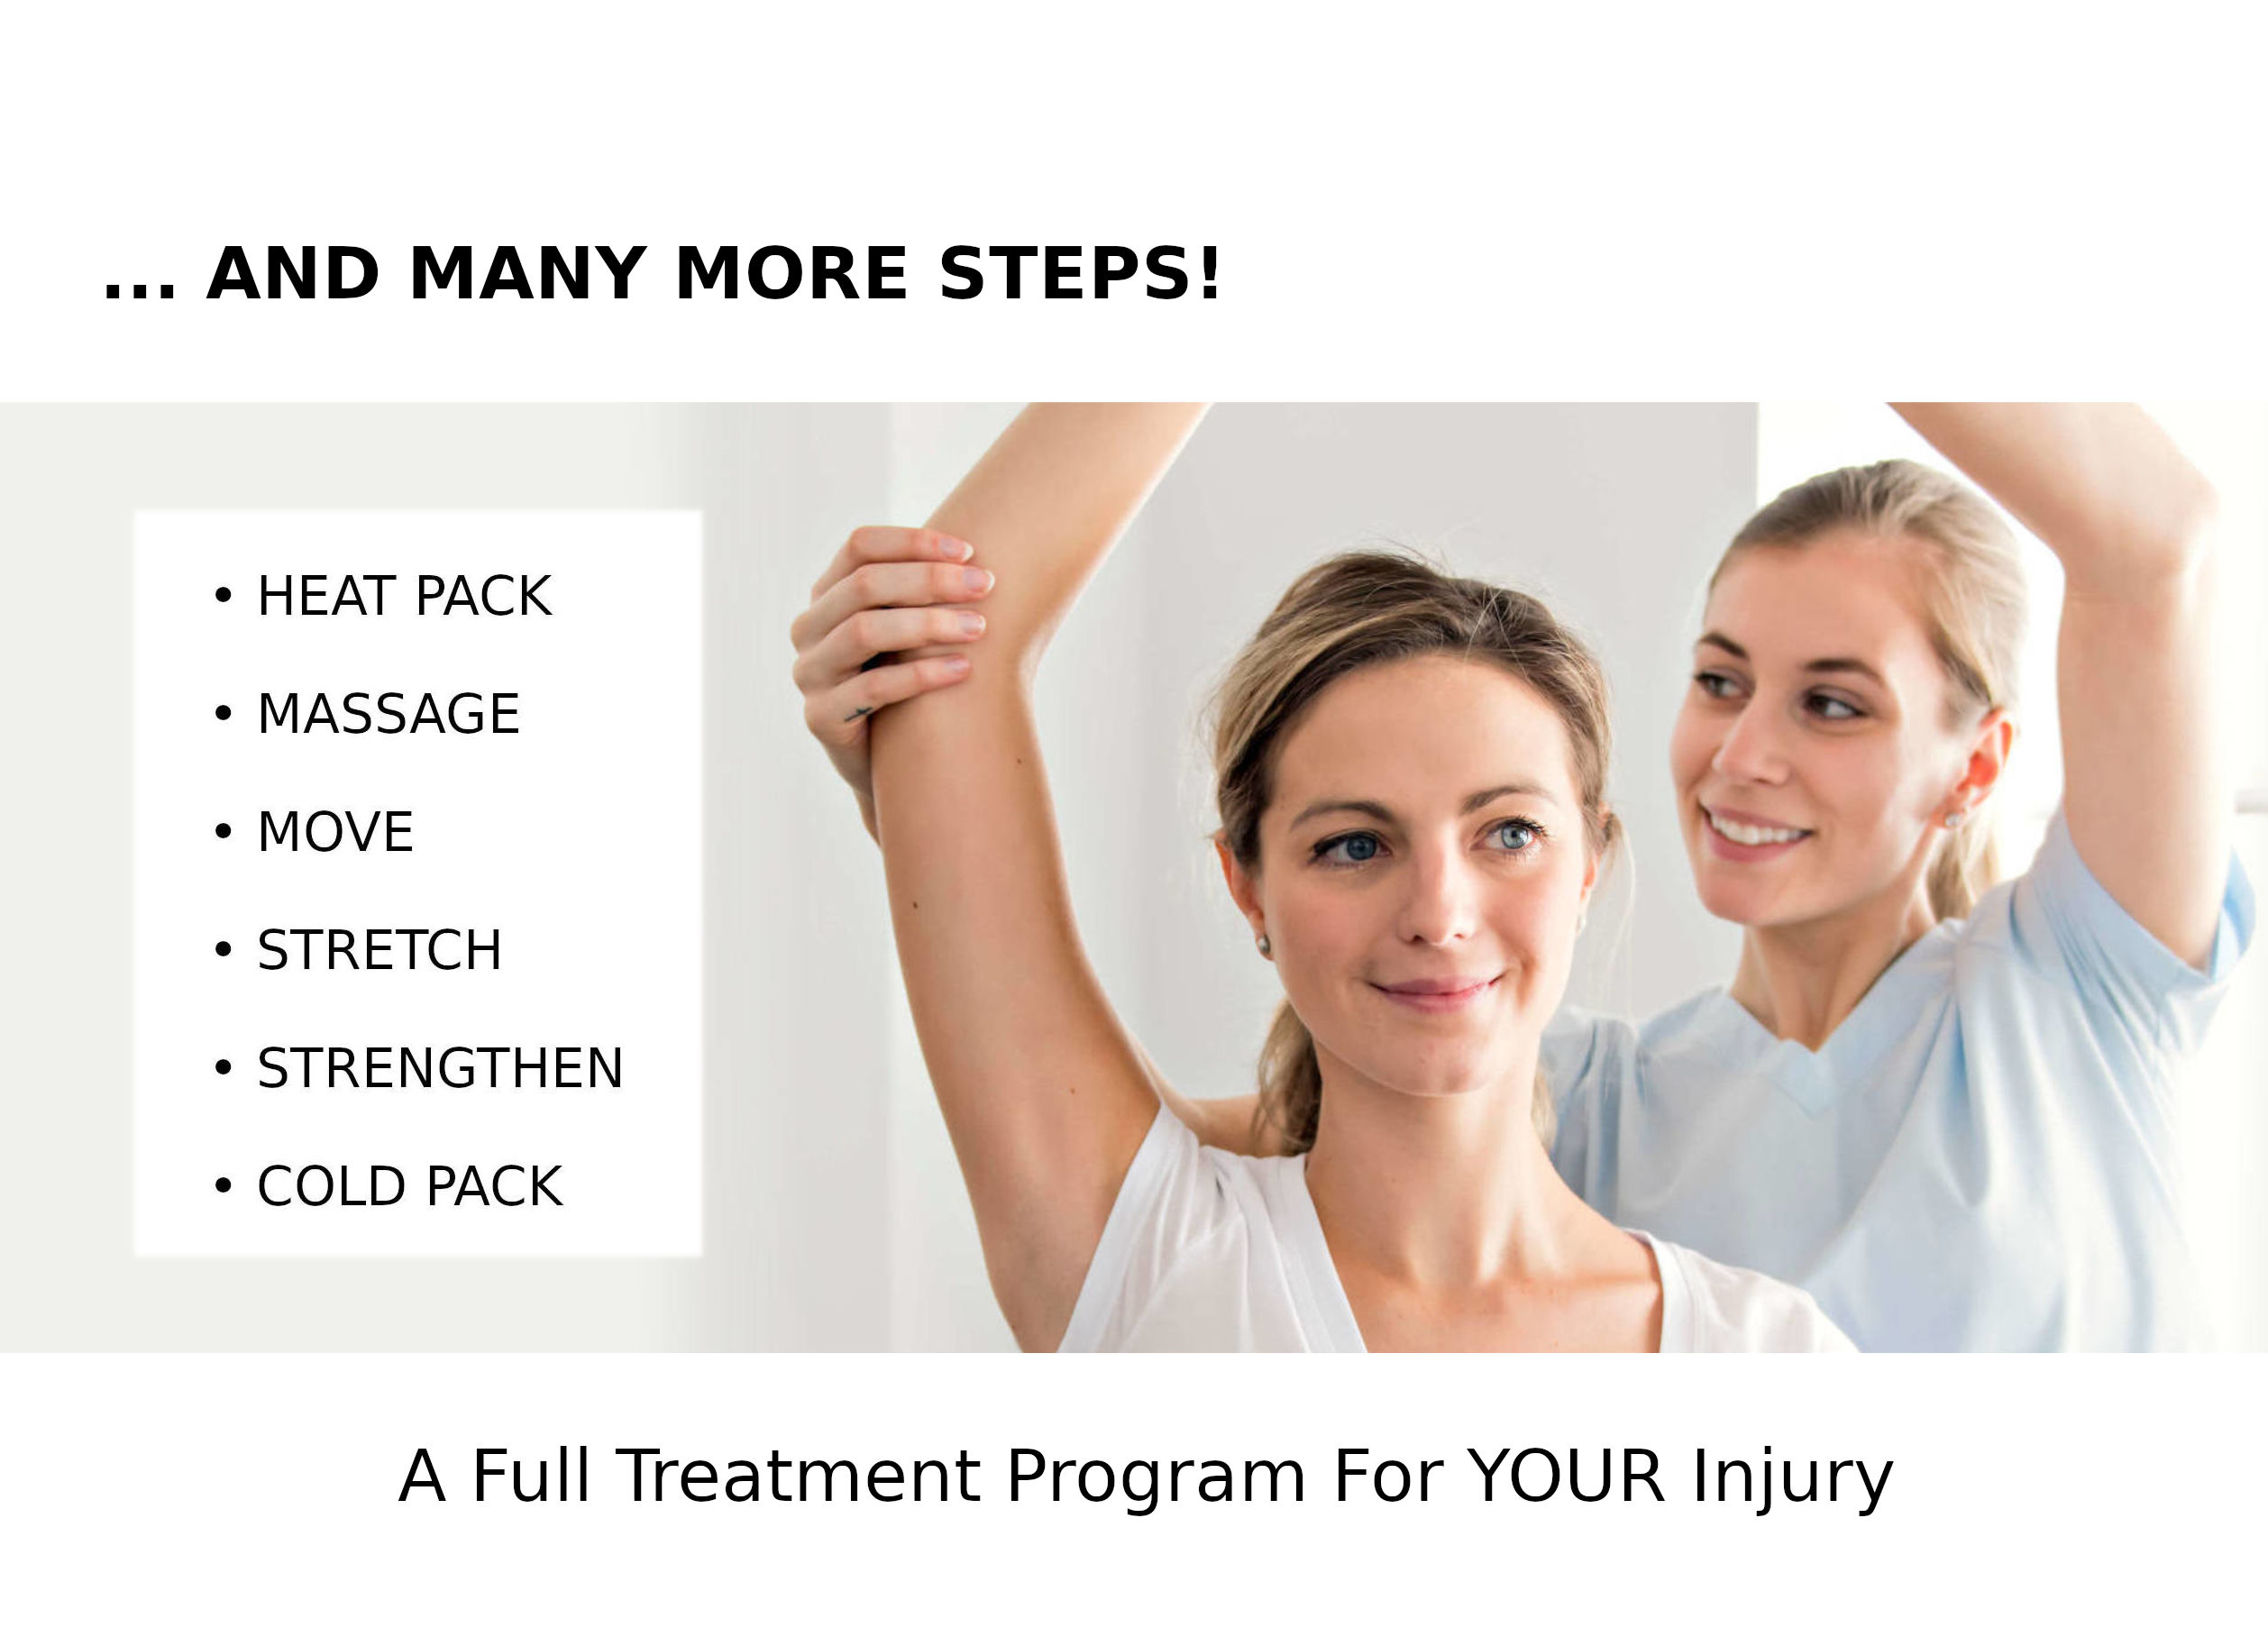 A full program for your injury